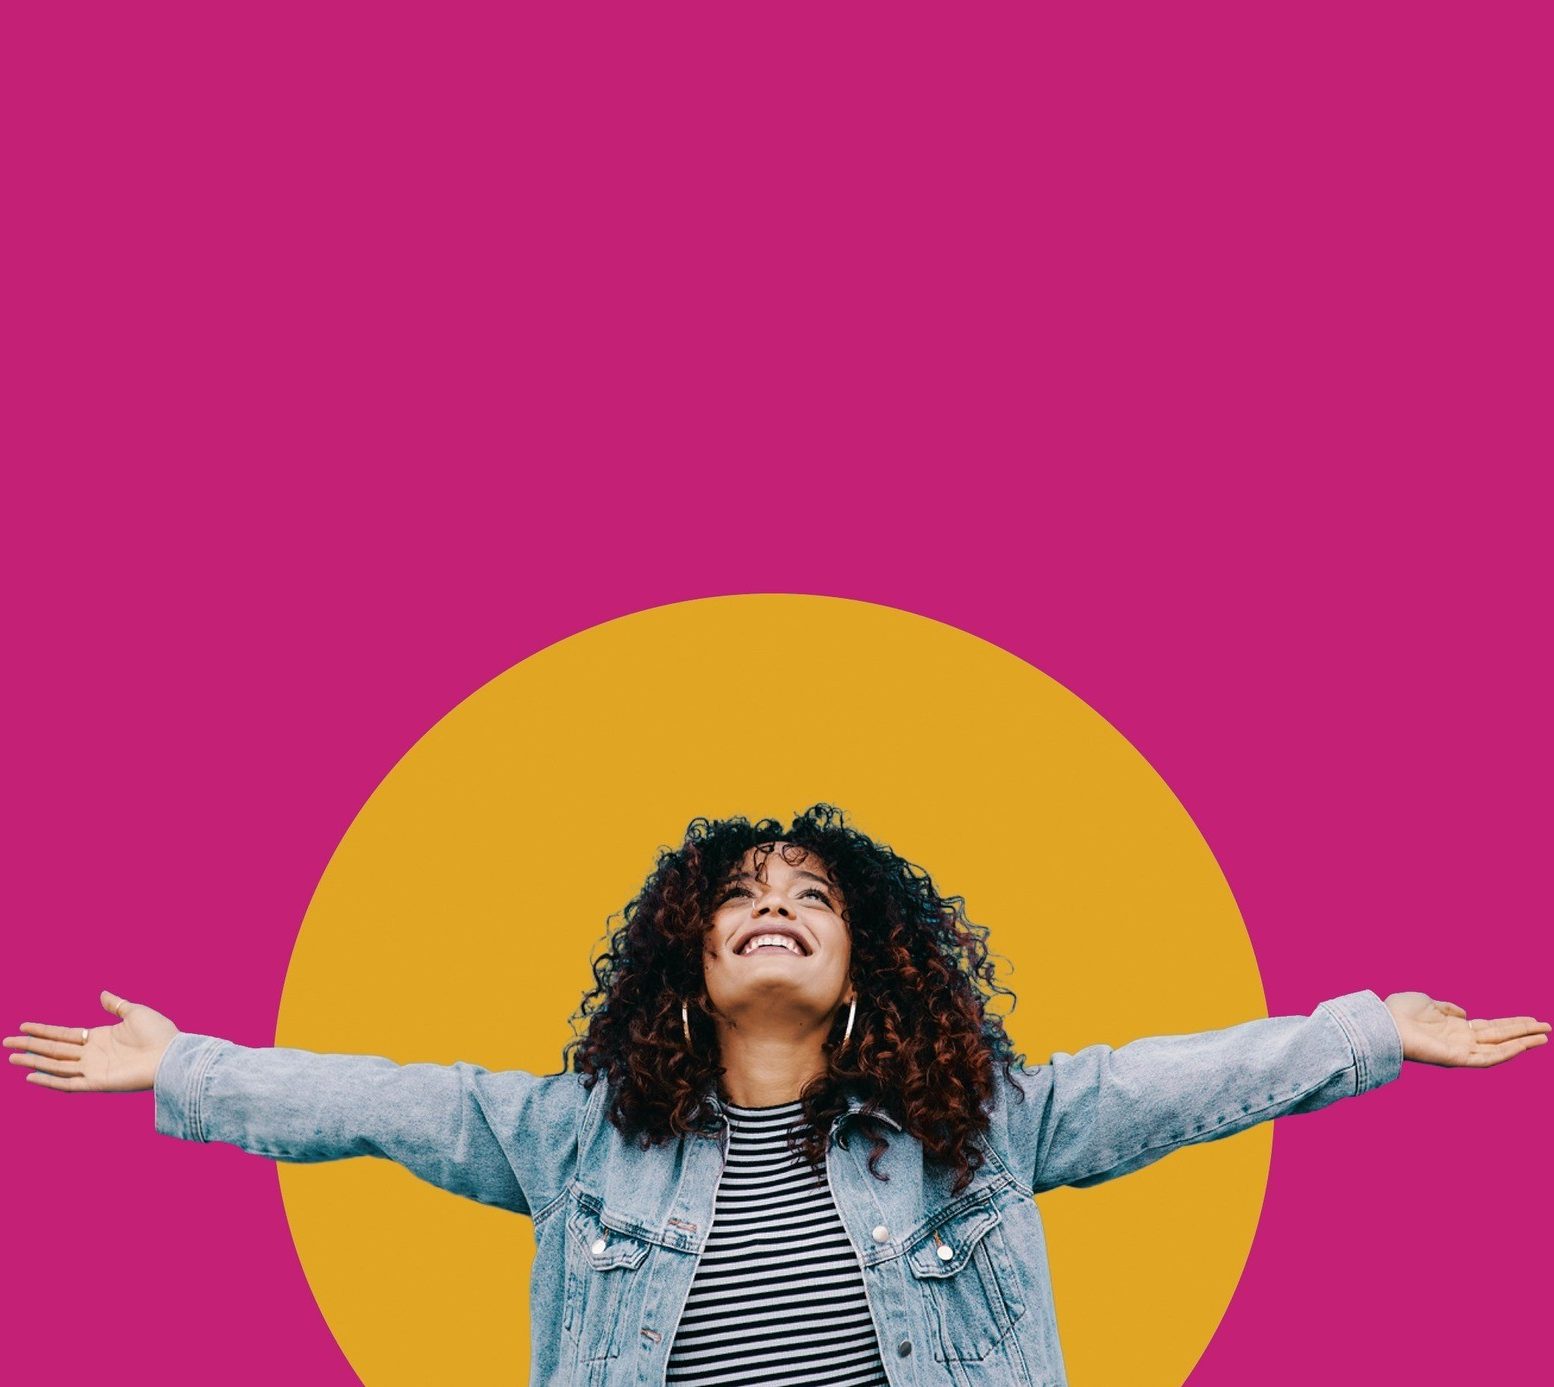 An exuberant woman with curly hair is smiling broadly with her eyes closed, arms wide open as if embracing the world. She's wearing a striped top underneath a denim jacket. The background is vibrant fuchsia with a large, mustard yellow circle positioned behind her, giving a lively and joyful composition to the image.